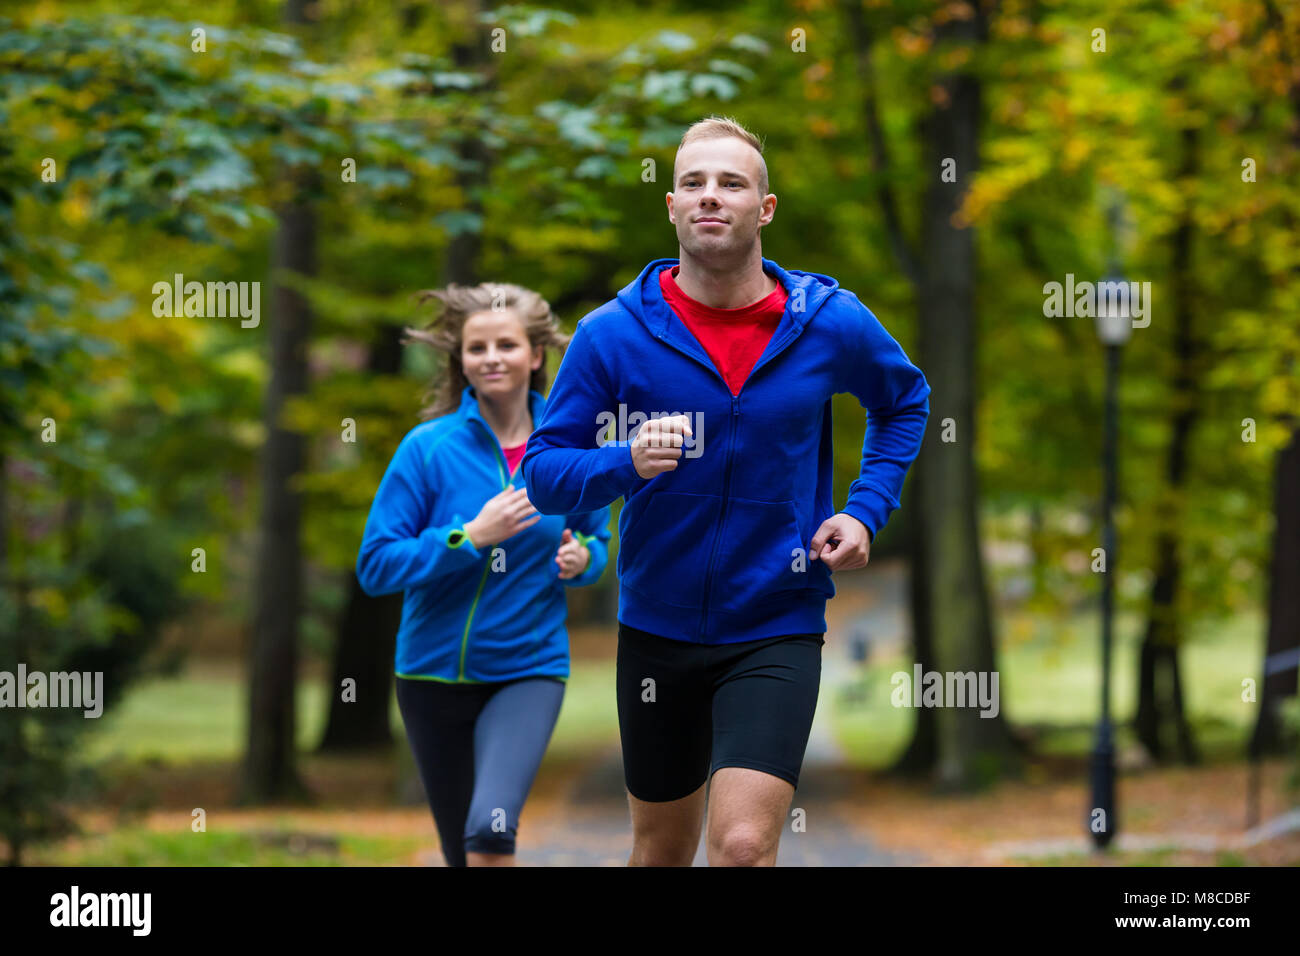 Healthy lifestyle - woman and man running in park Stock Photo